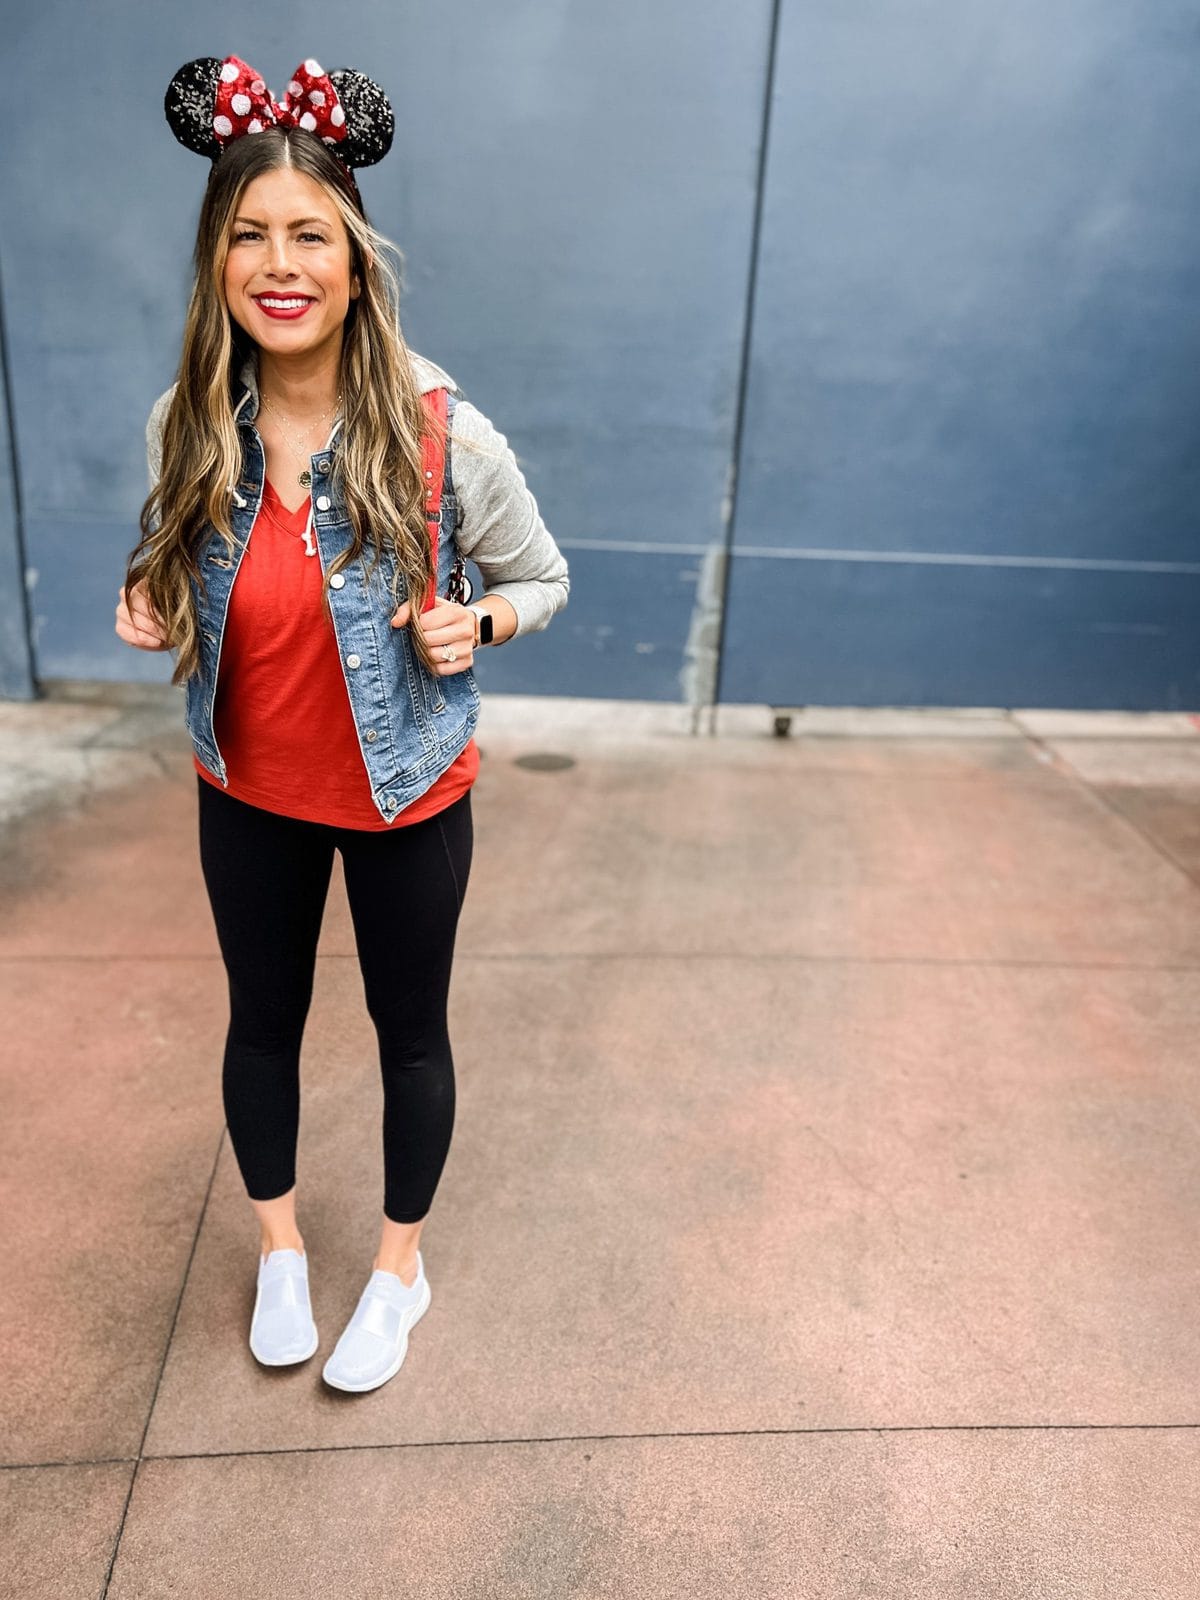 What To Wear To Disneyland: Awesome Monthly Outfit Ideas - Cuisine